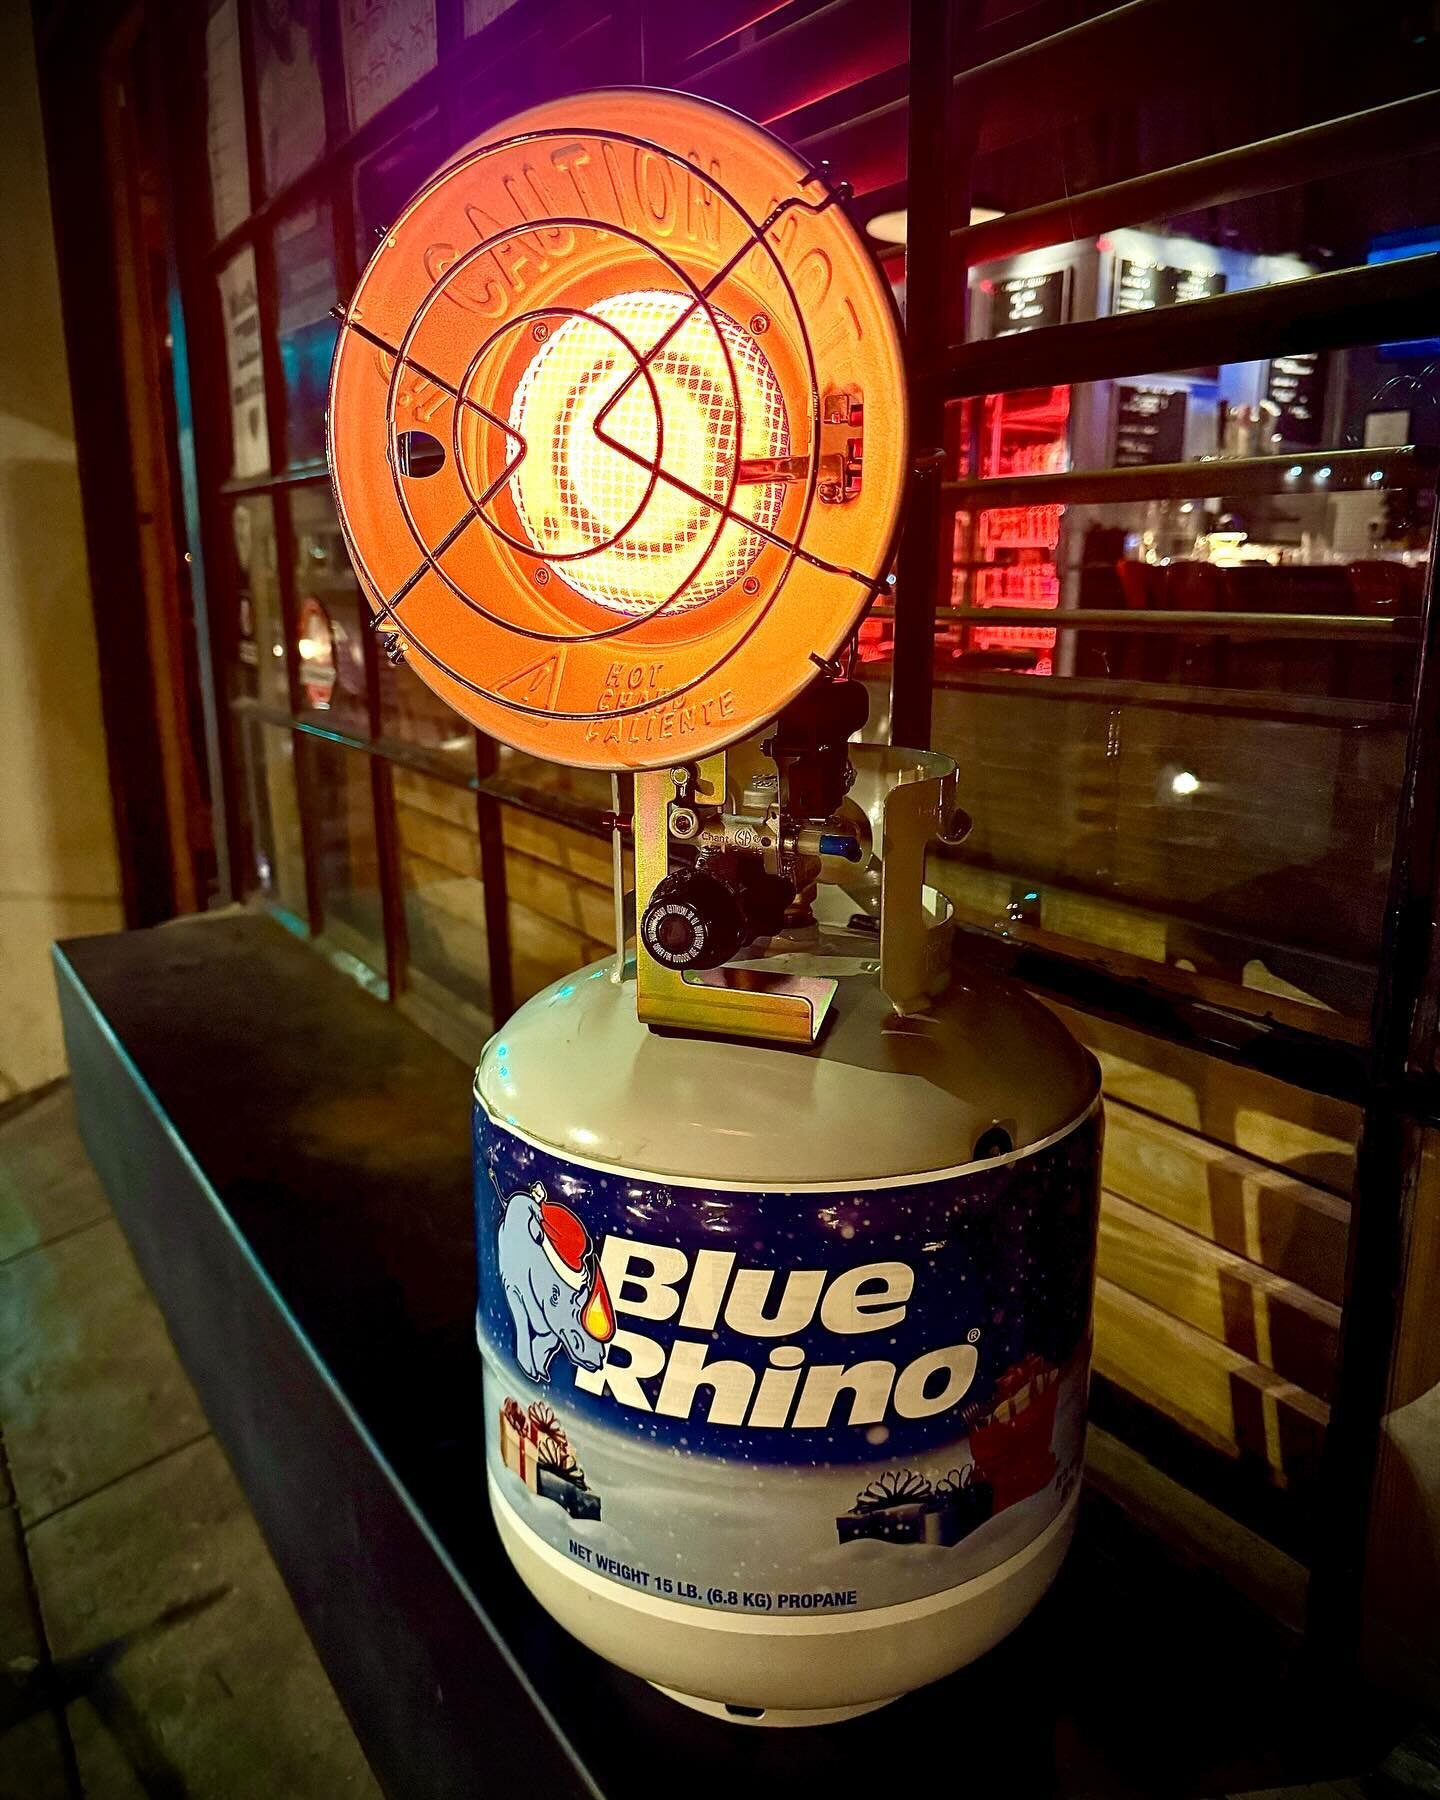 Got some new heaters for the patio! They&rsquo;re super high-tech! 😑😑😑 they actually work really great! Come warm those little piggies while sipping on a tasty bevvy!
Love ya, mean it!
☮️❤️👽